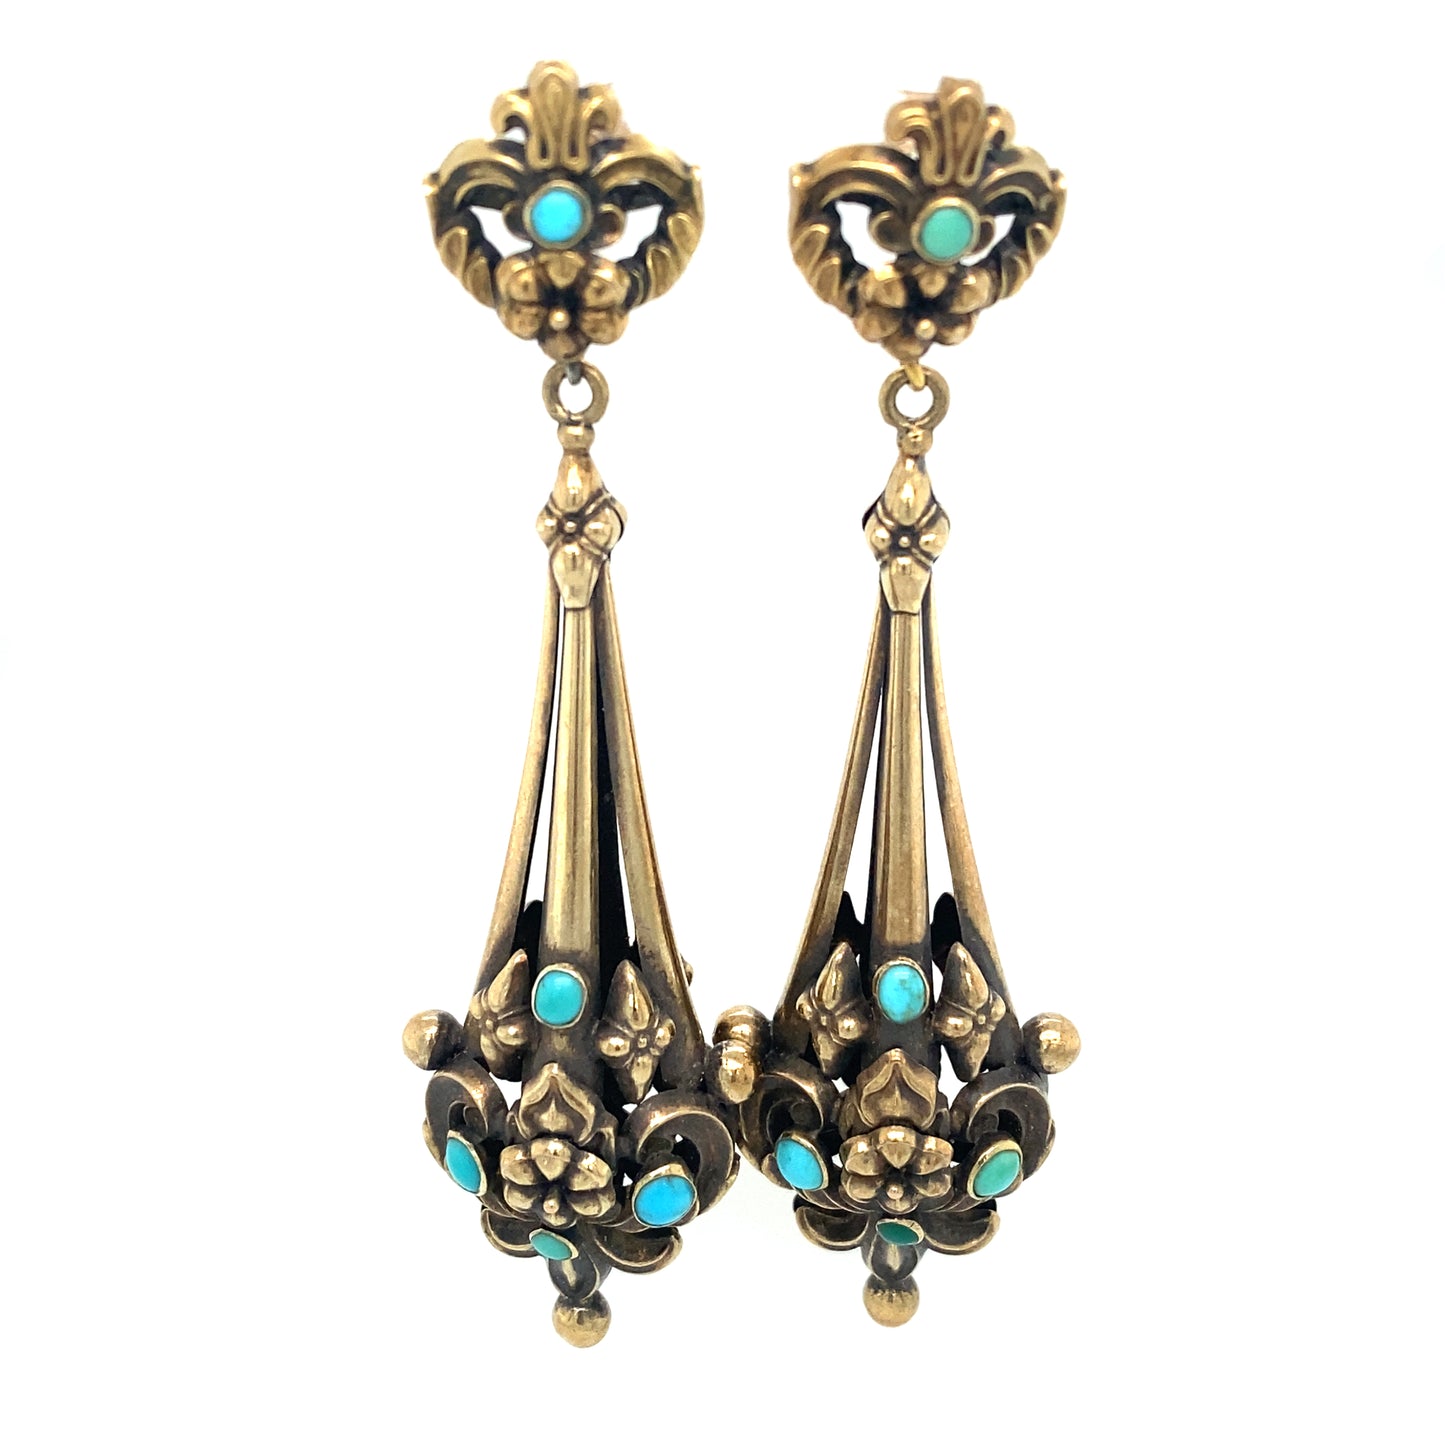 Circa 1860s Victorian Turquoise Dangle Earrings in 10K Gold